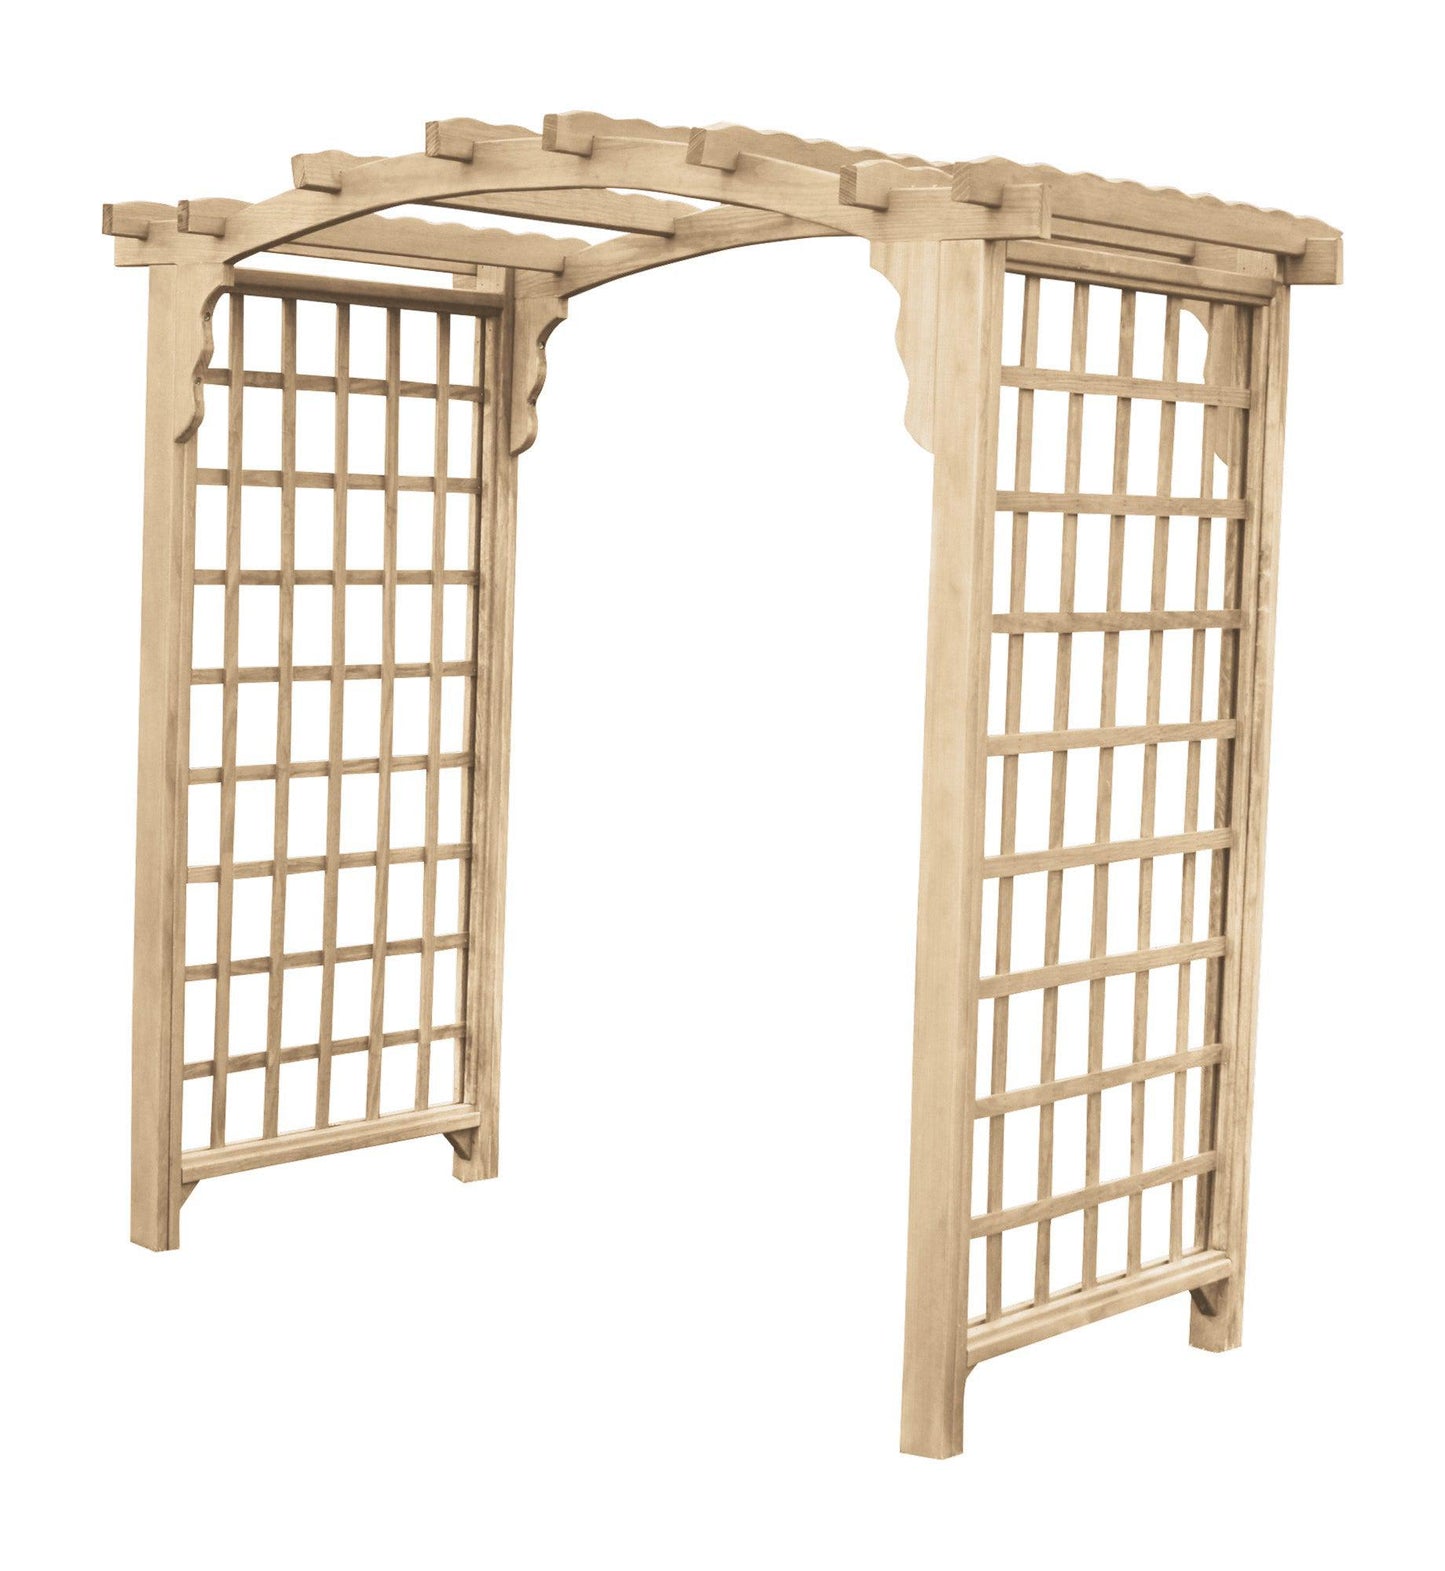 A&L FURNITURE CO. 6' Jamesport Pressure Treated Pine Arbor - LEAD TIME TO SHIP 10 BUSINESS DAYS